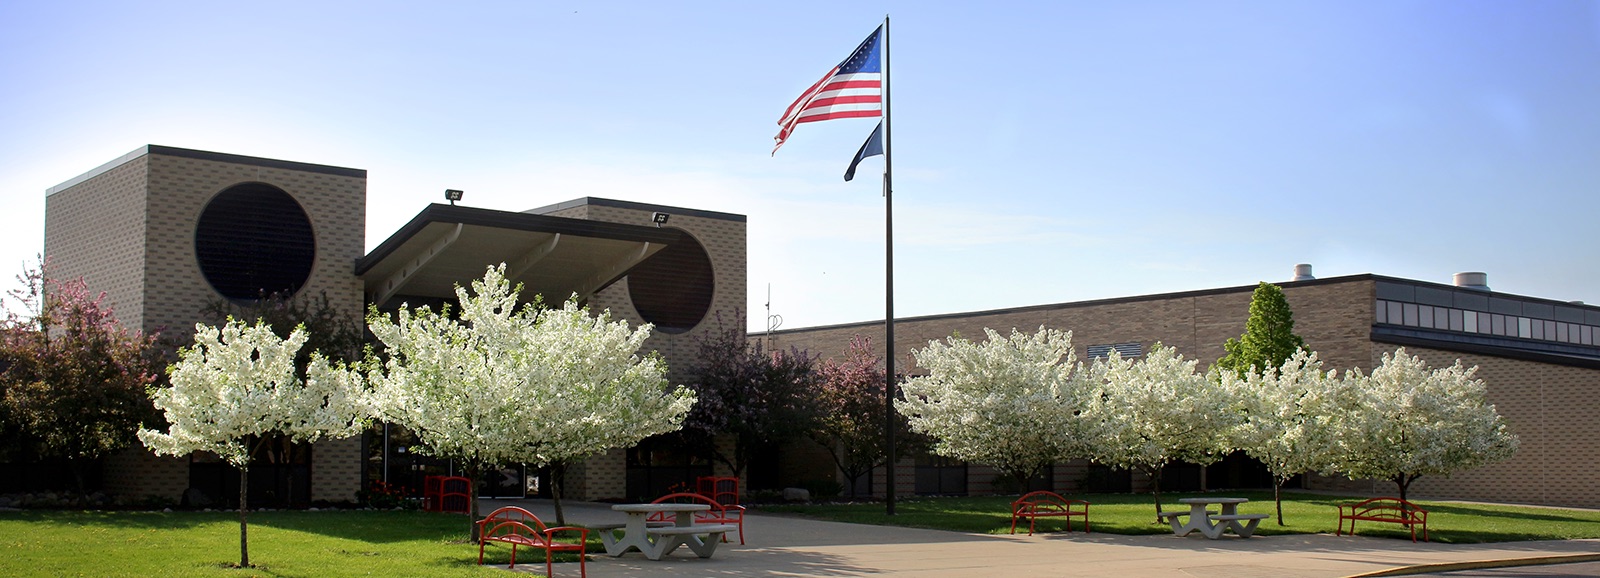 school building american flag and flowering trees on front lawn